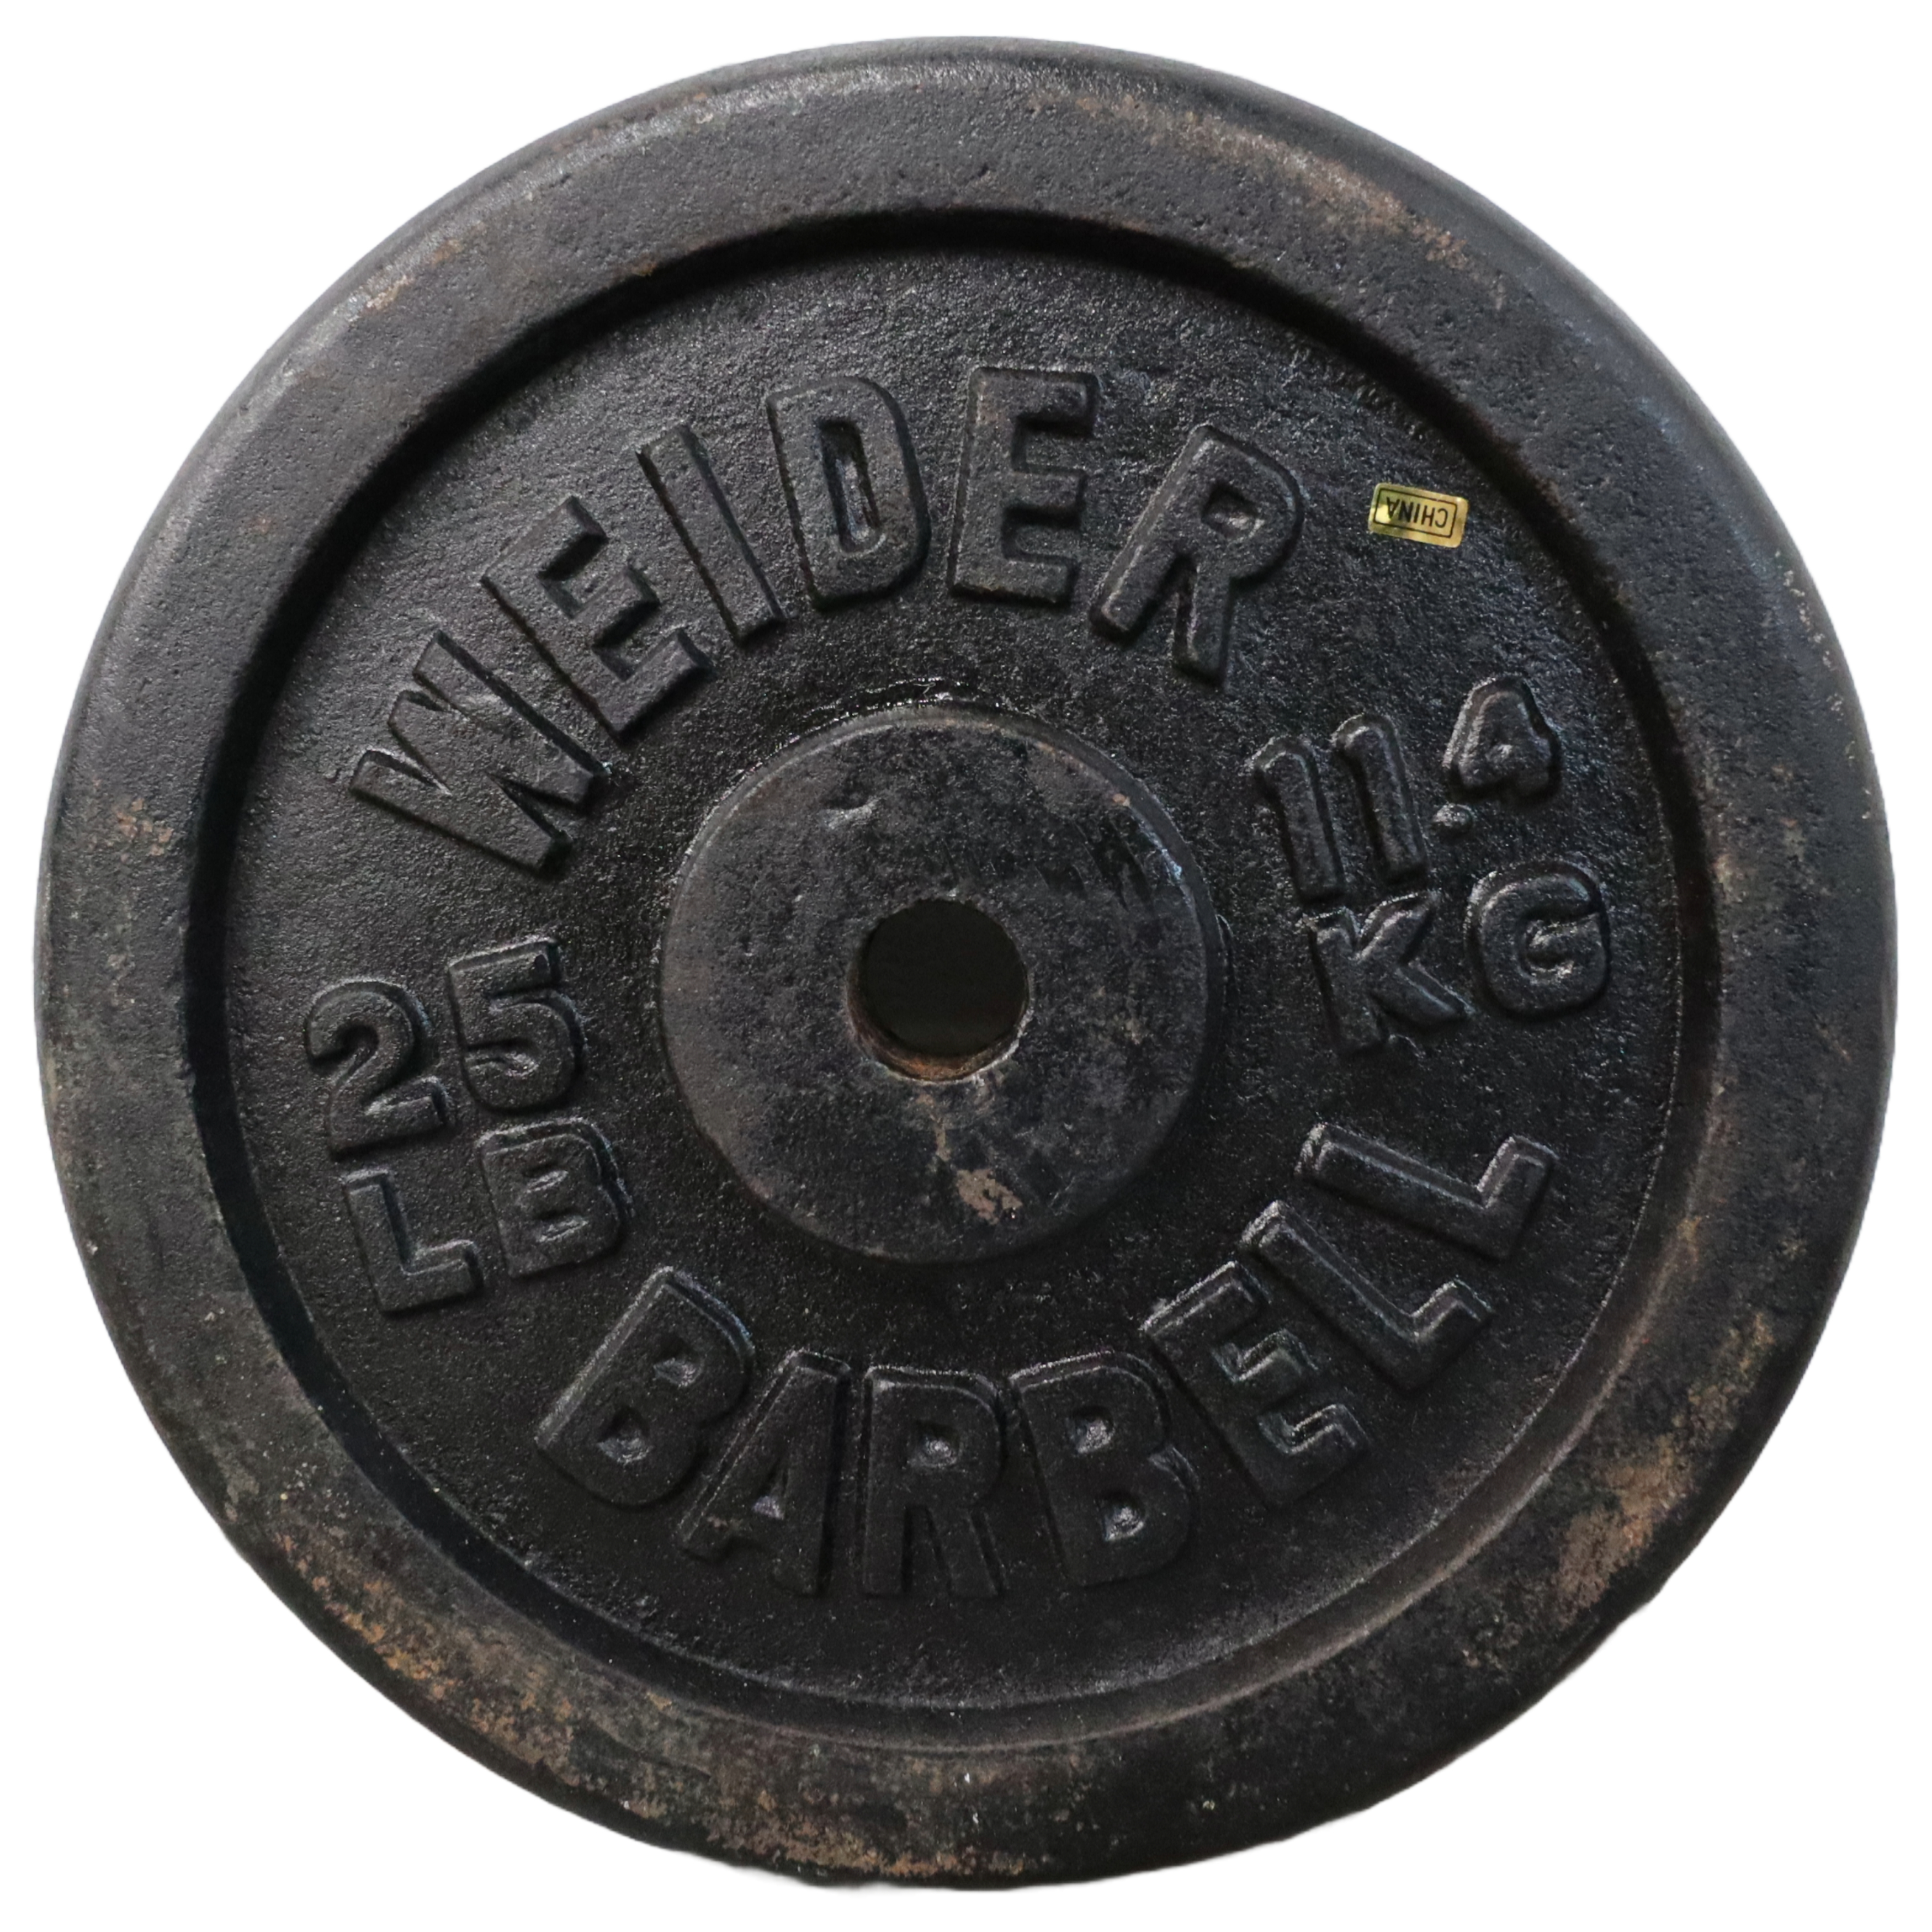 Used Weider Barbell 25LB Standard Plate Weight Freeweights & Accessories